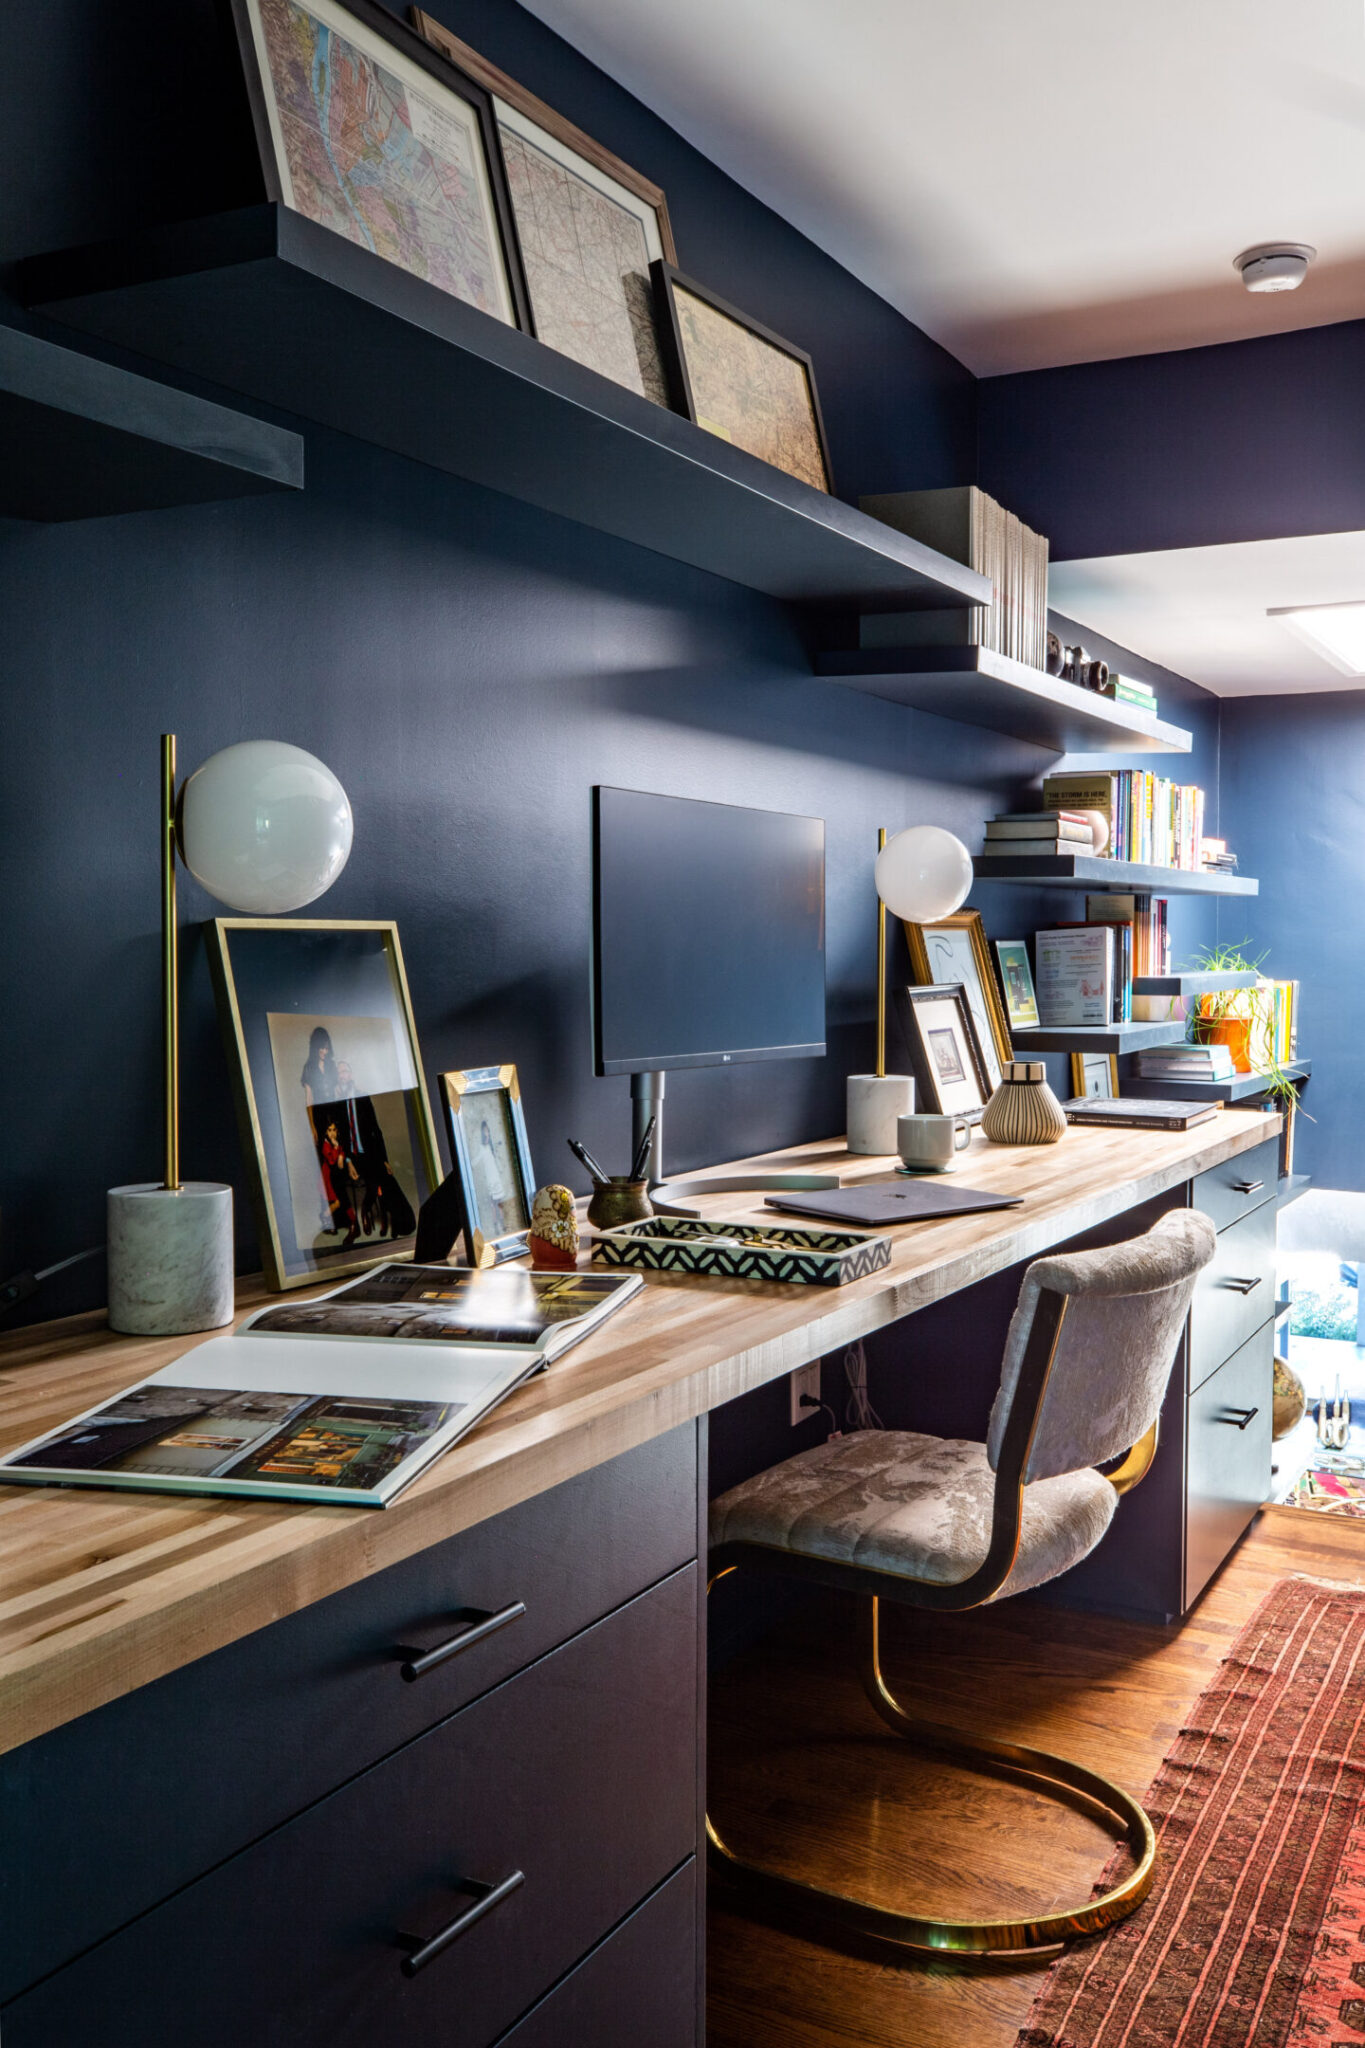 Stylish Home Office Furniture: Creating A Productive Workspace